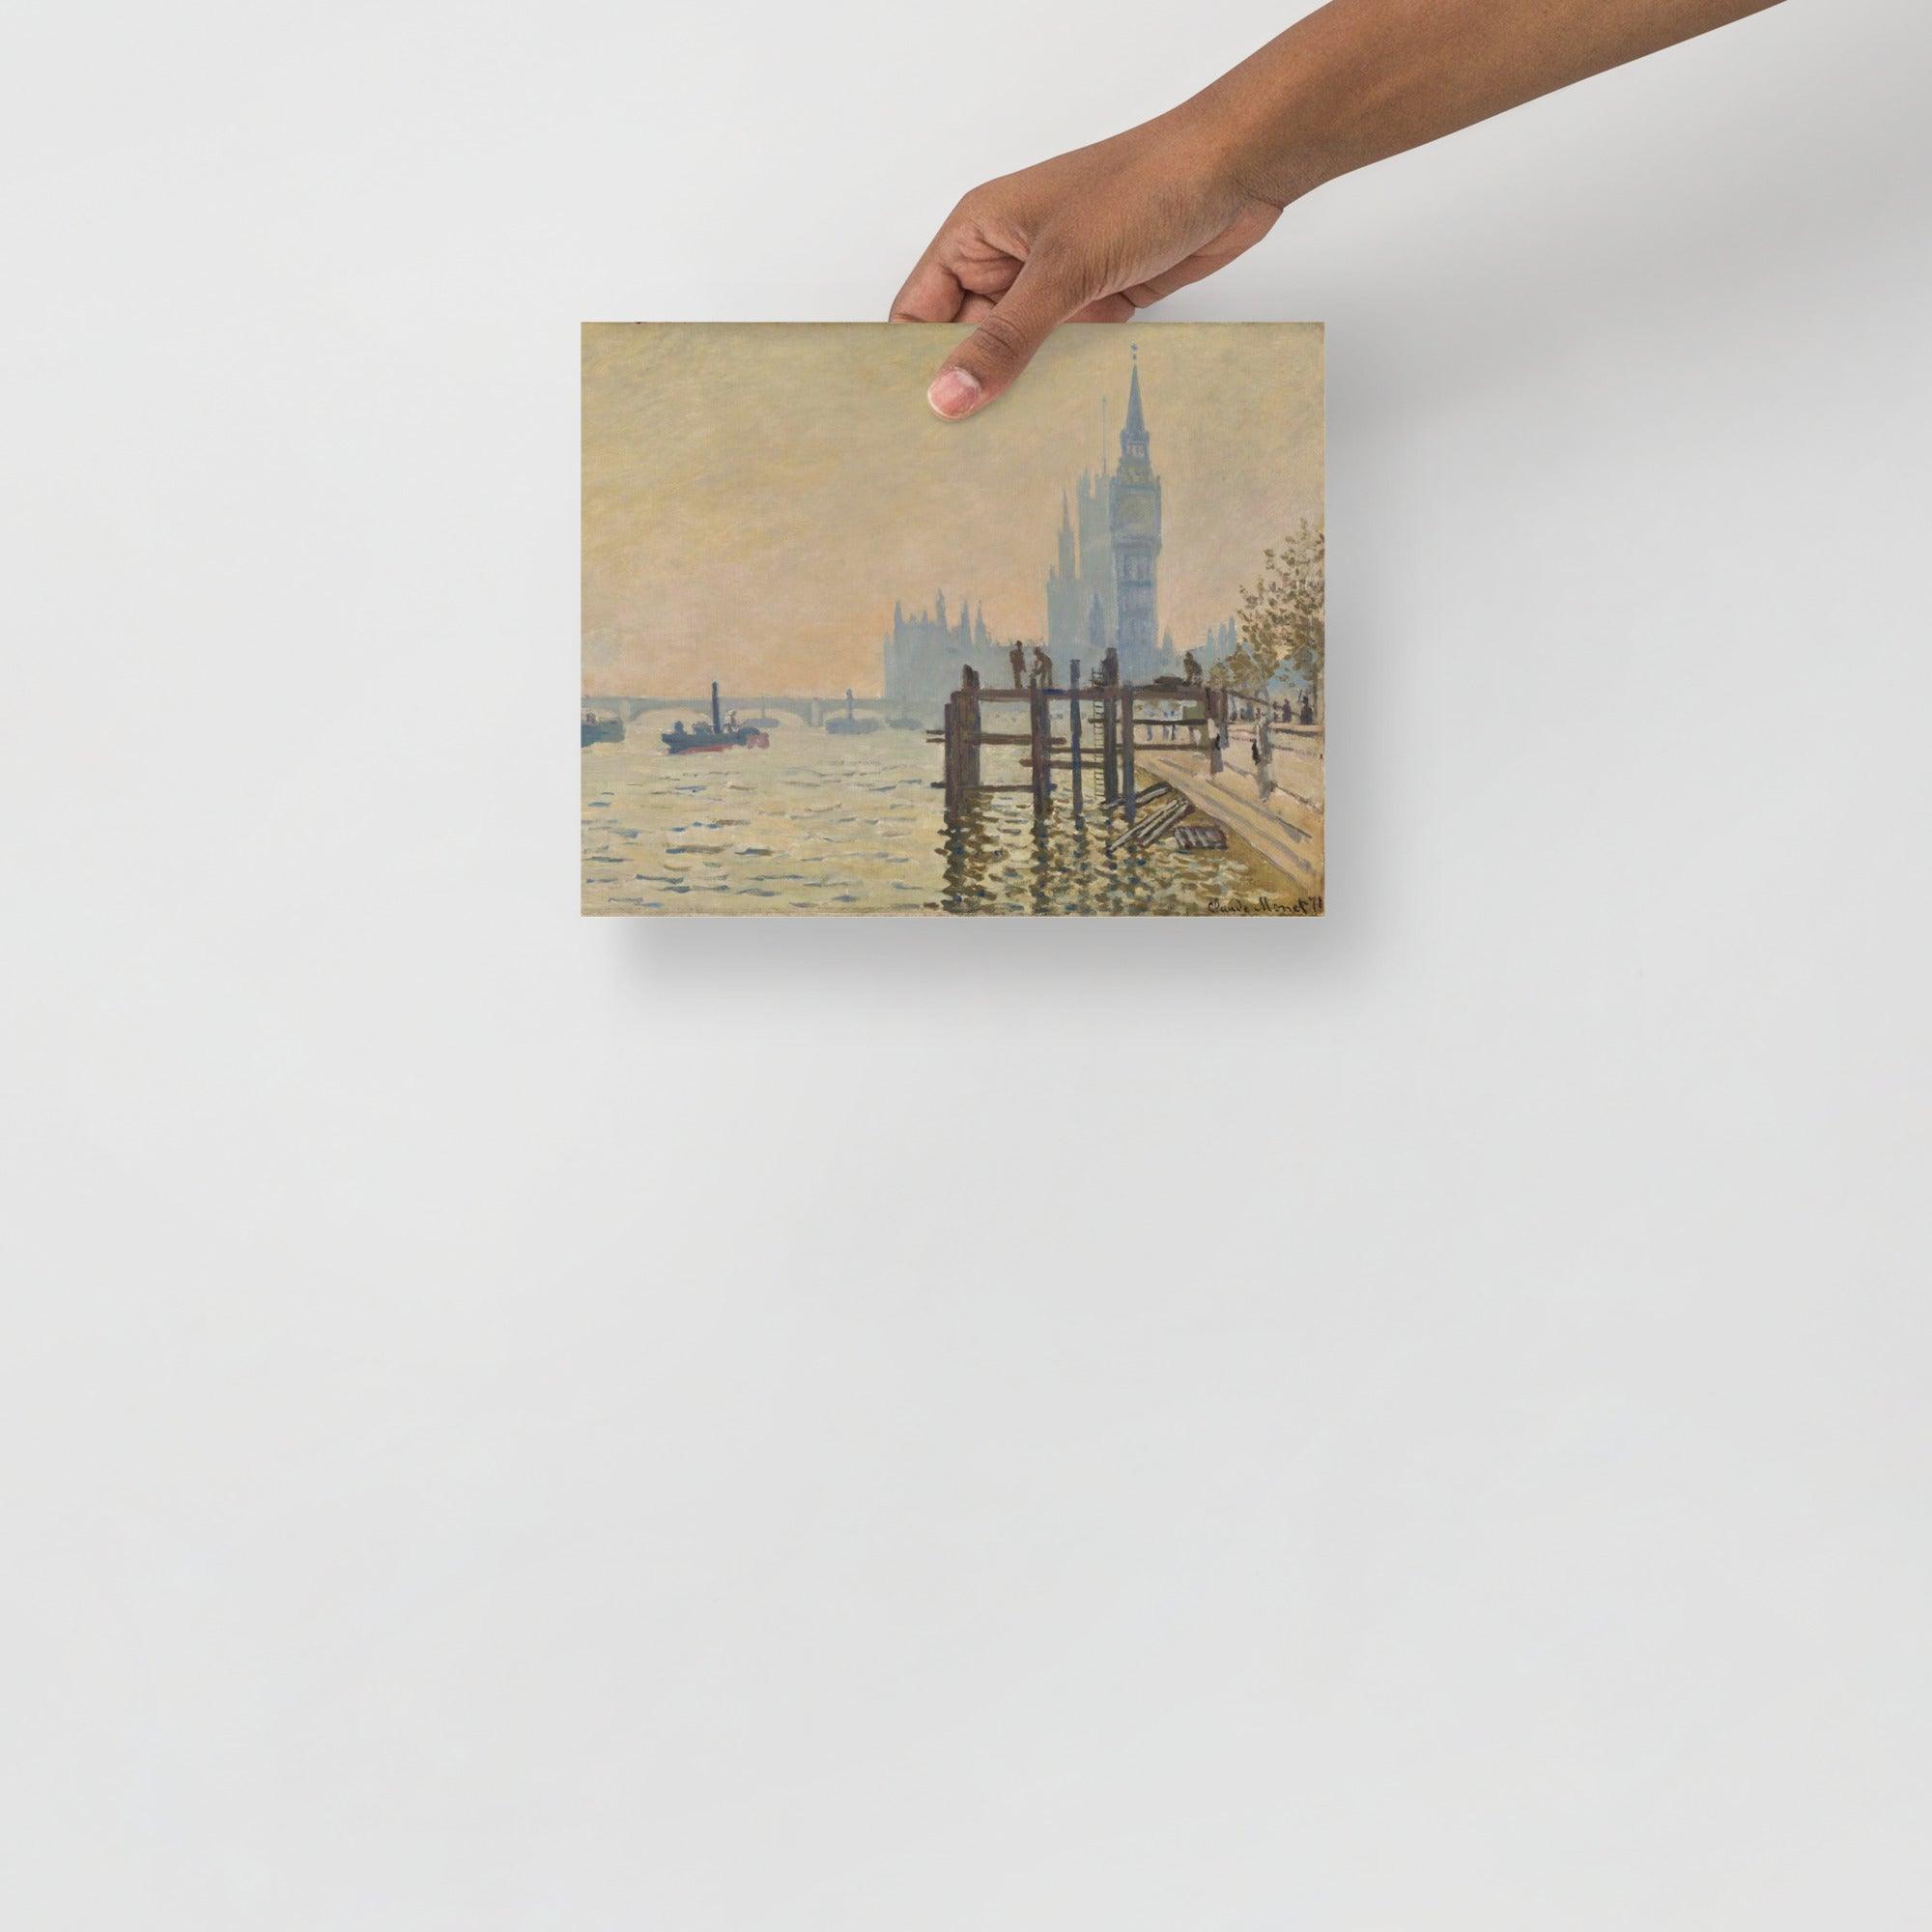 The Thames Below Water by Claude Monet poster on a plain backdrop in size 8x10”.